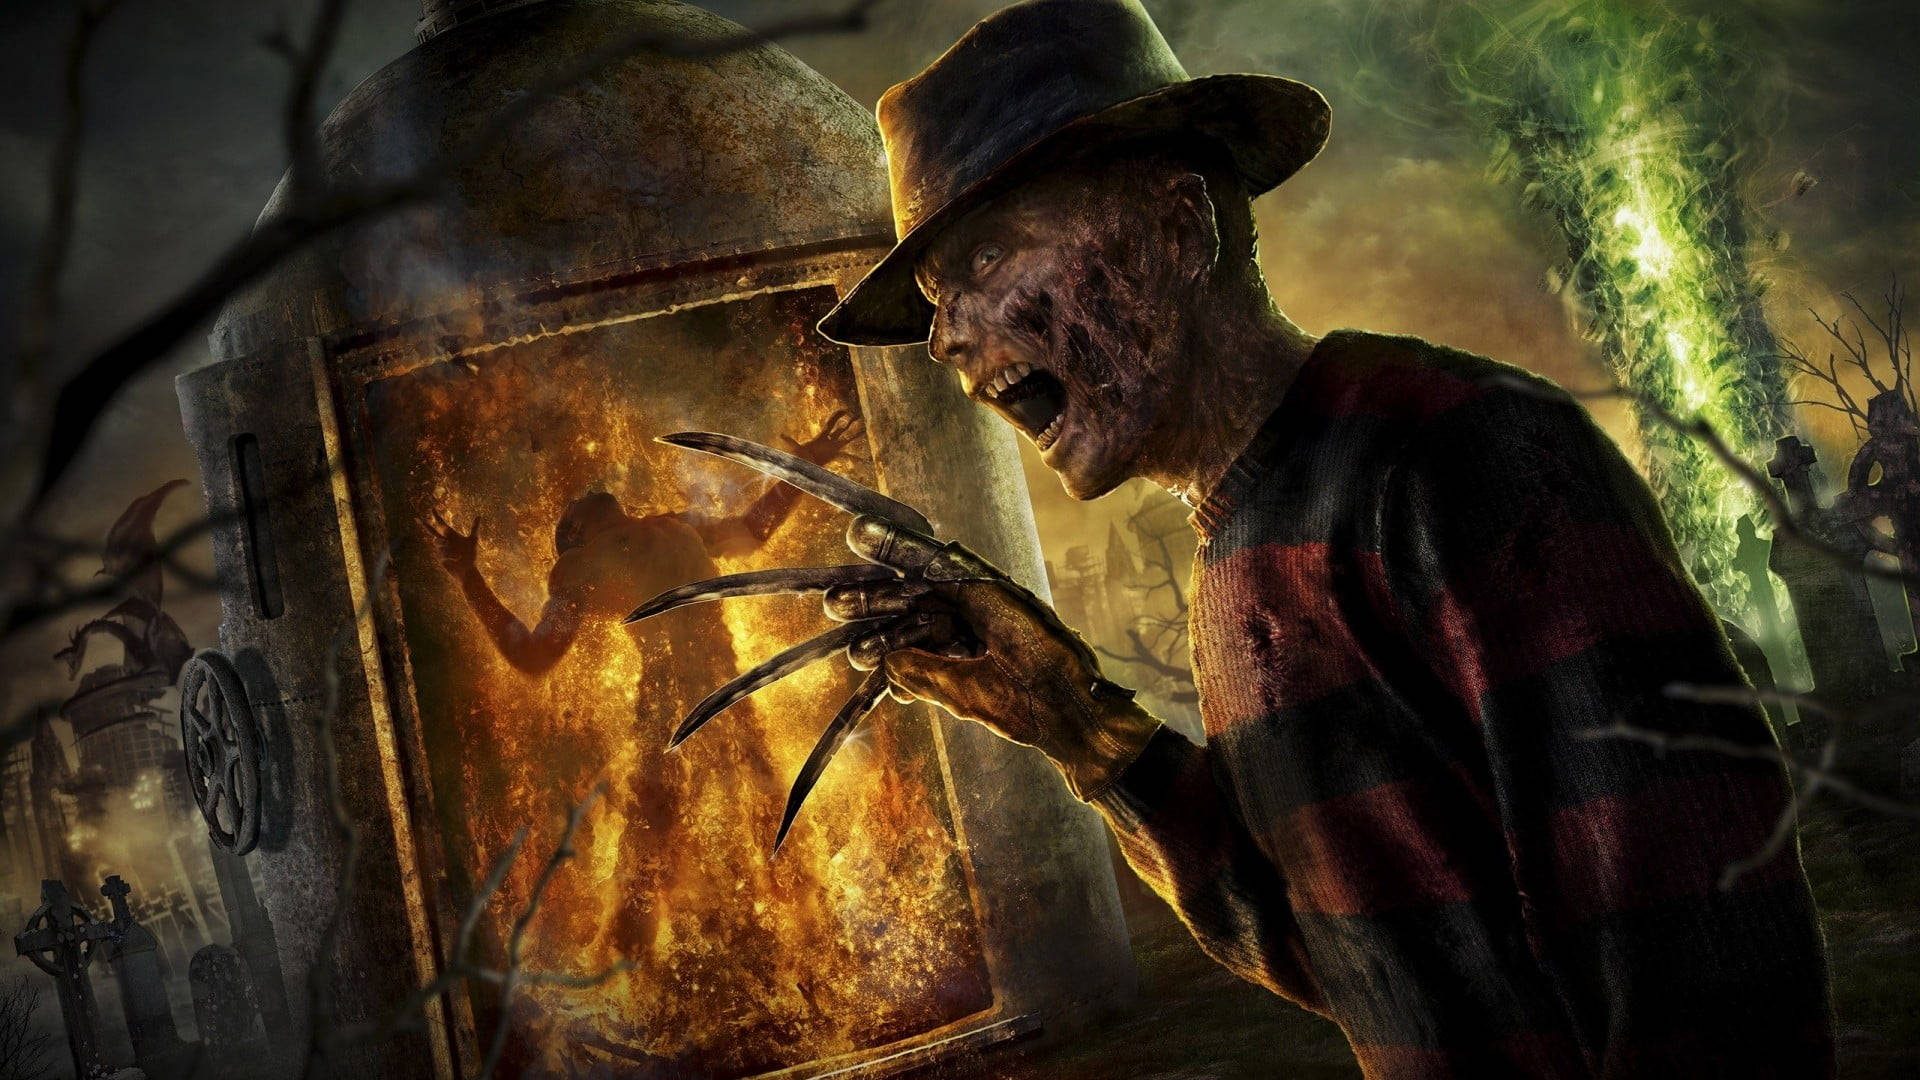 The Mythical Freddy Krueger In A Spooky Cemetery Background